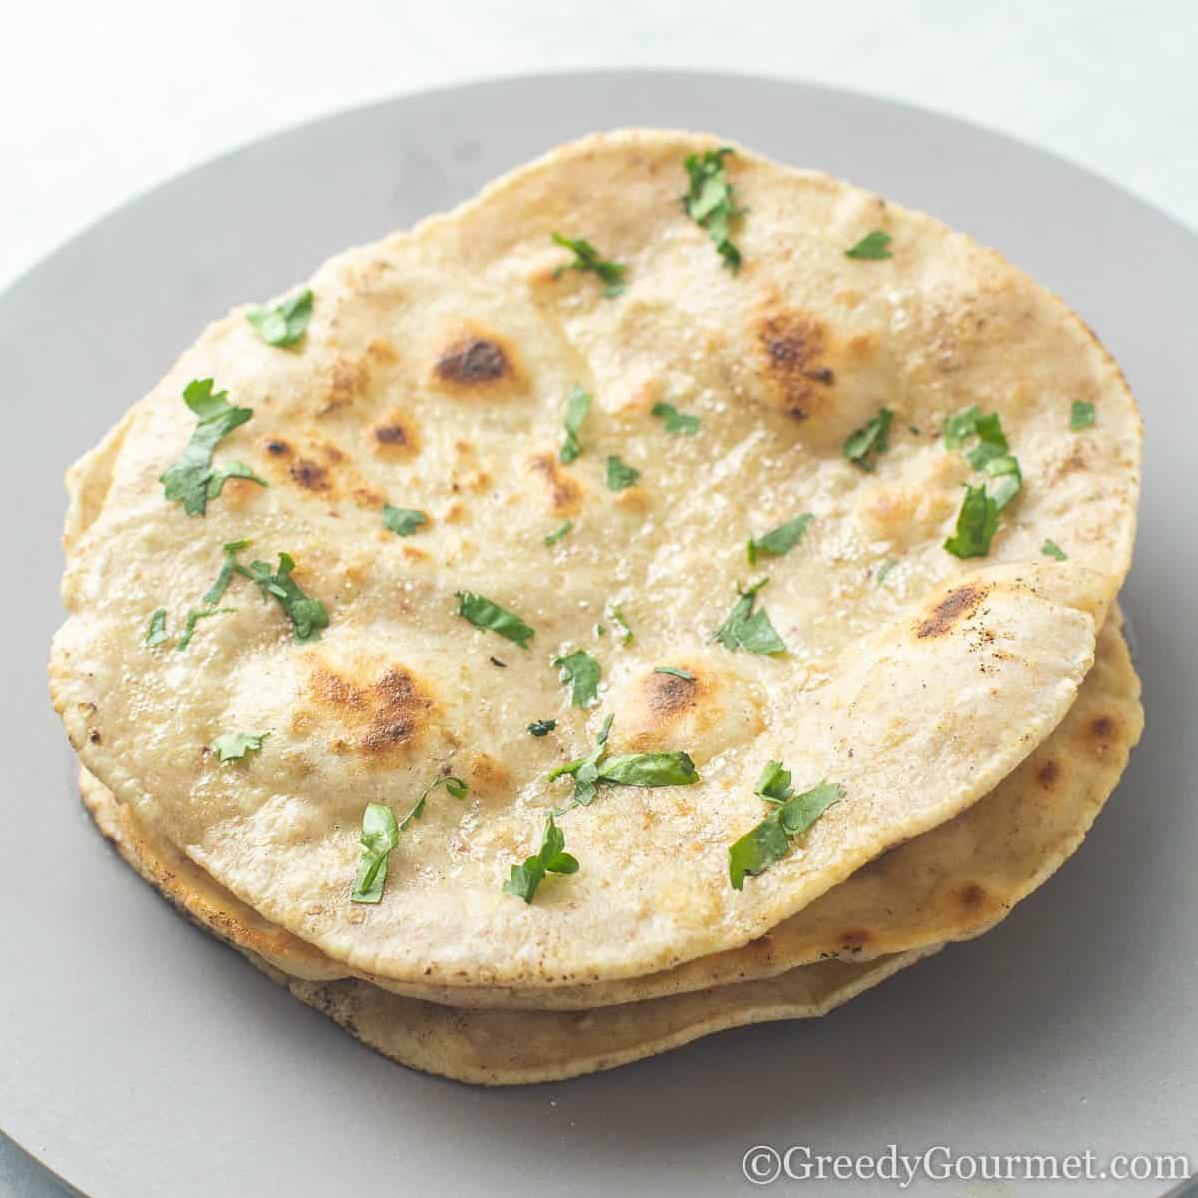  Who says gluten-free can't be delicious? These rotis say otherwise.